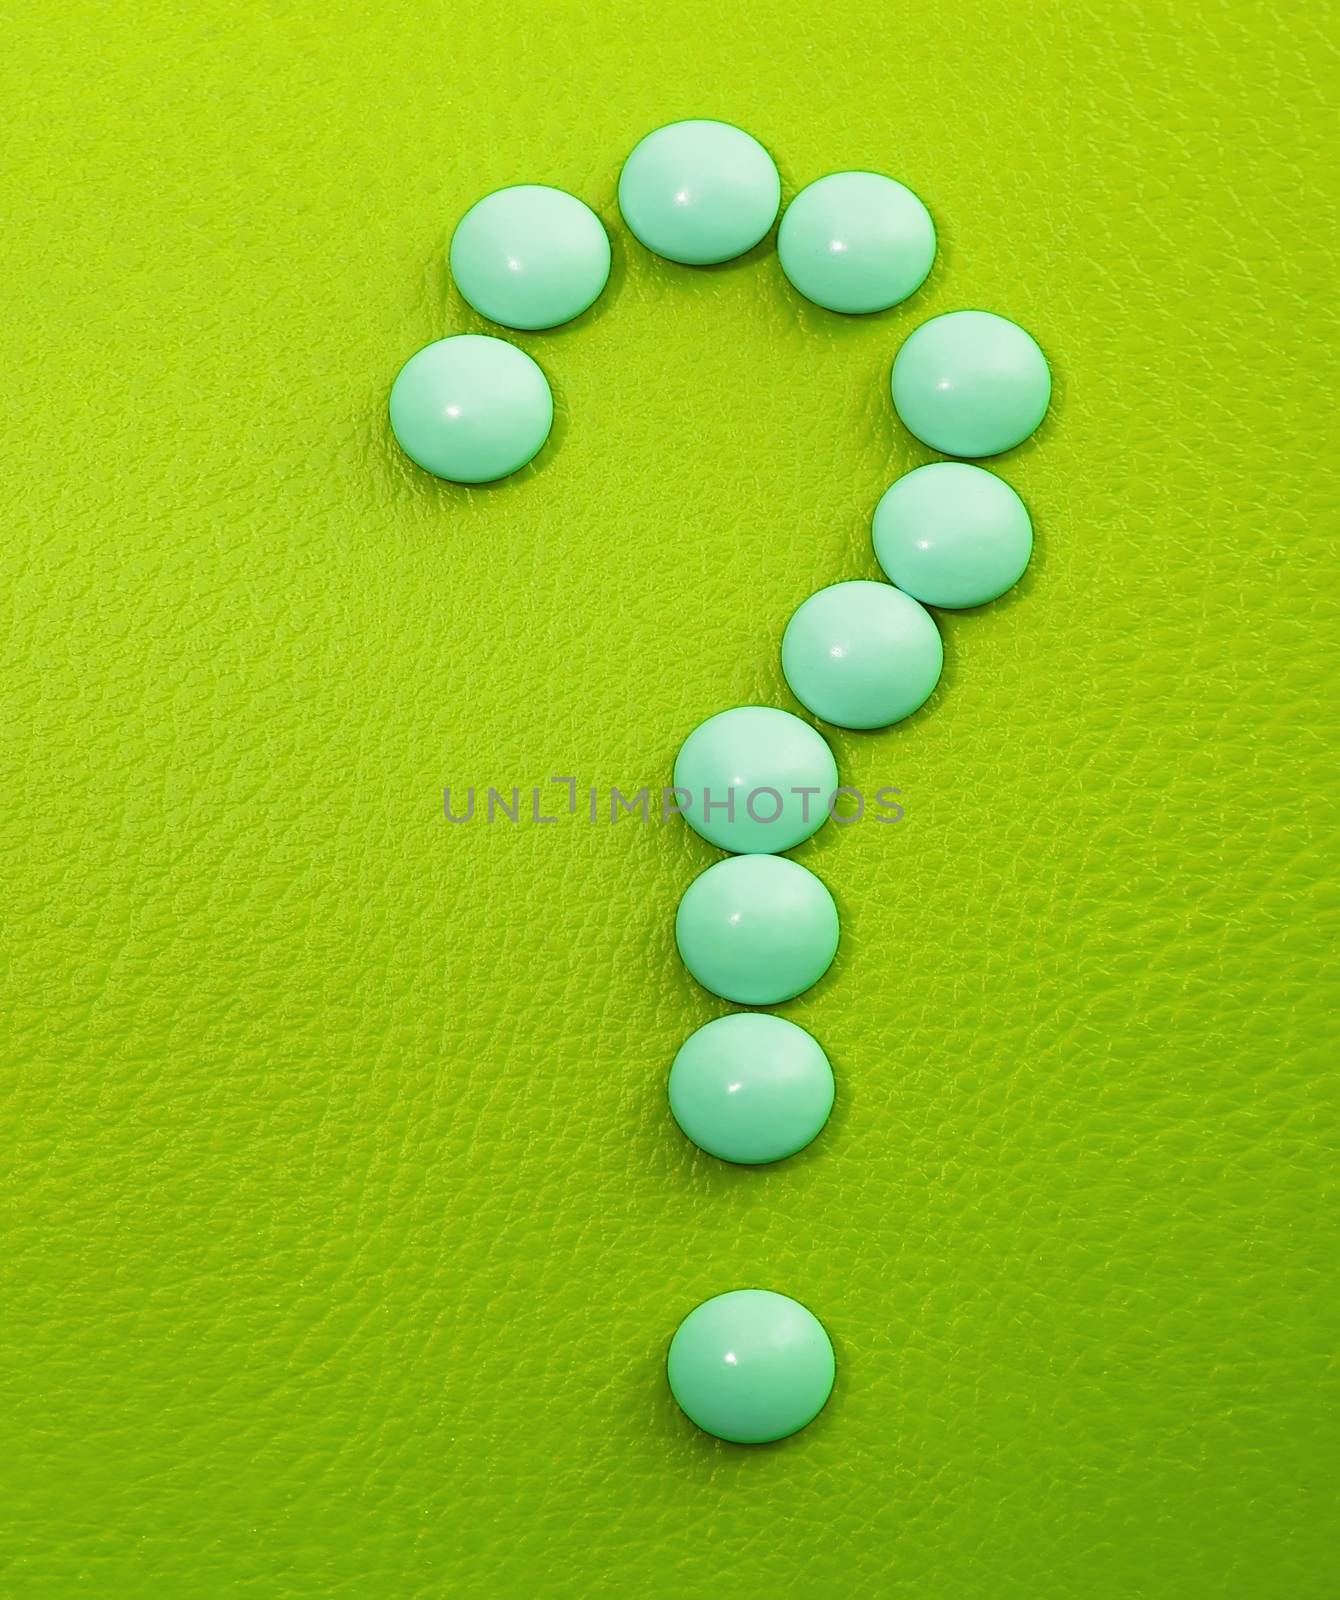 tablets, medicines and vitamins, EPS, question mark of pills by KoliadzynskaIryna